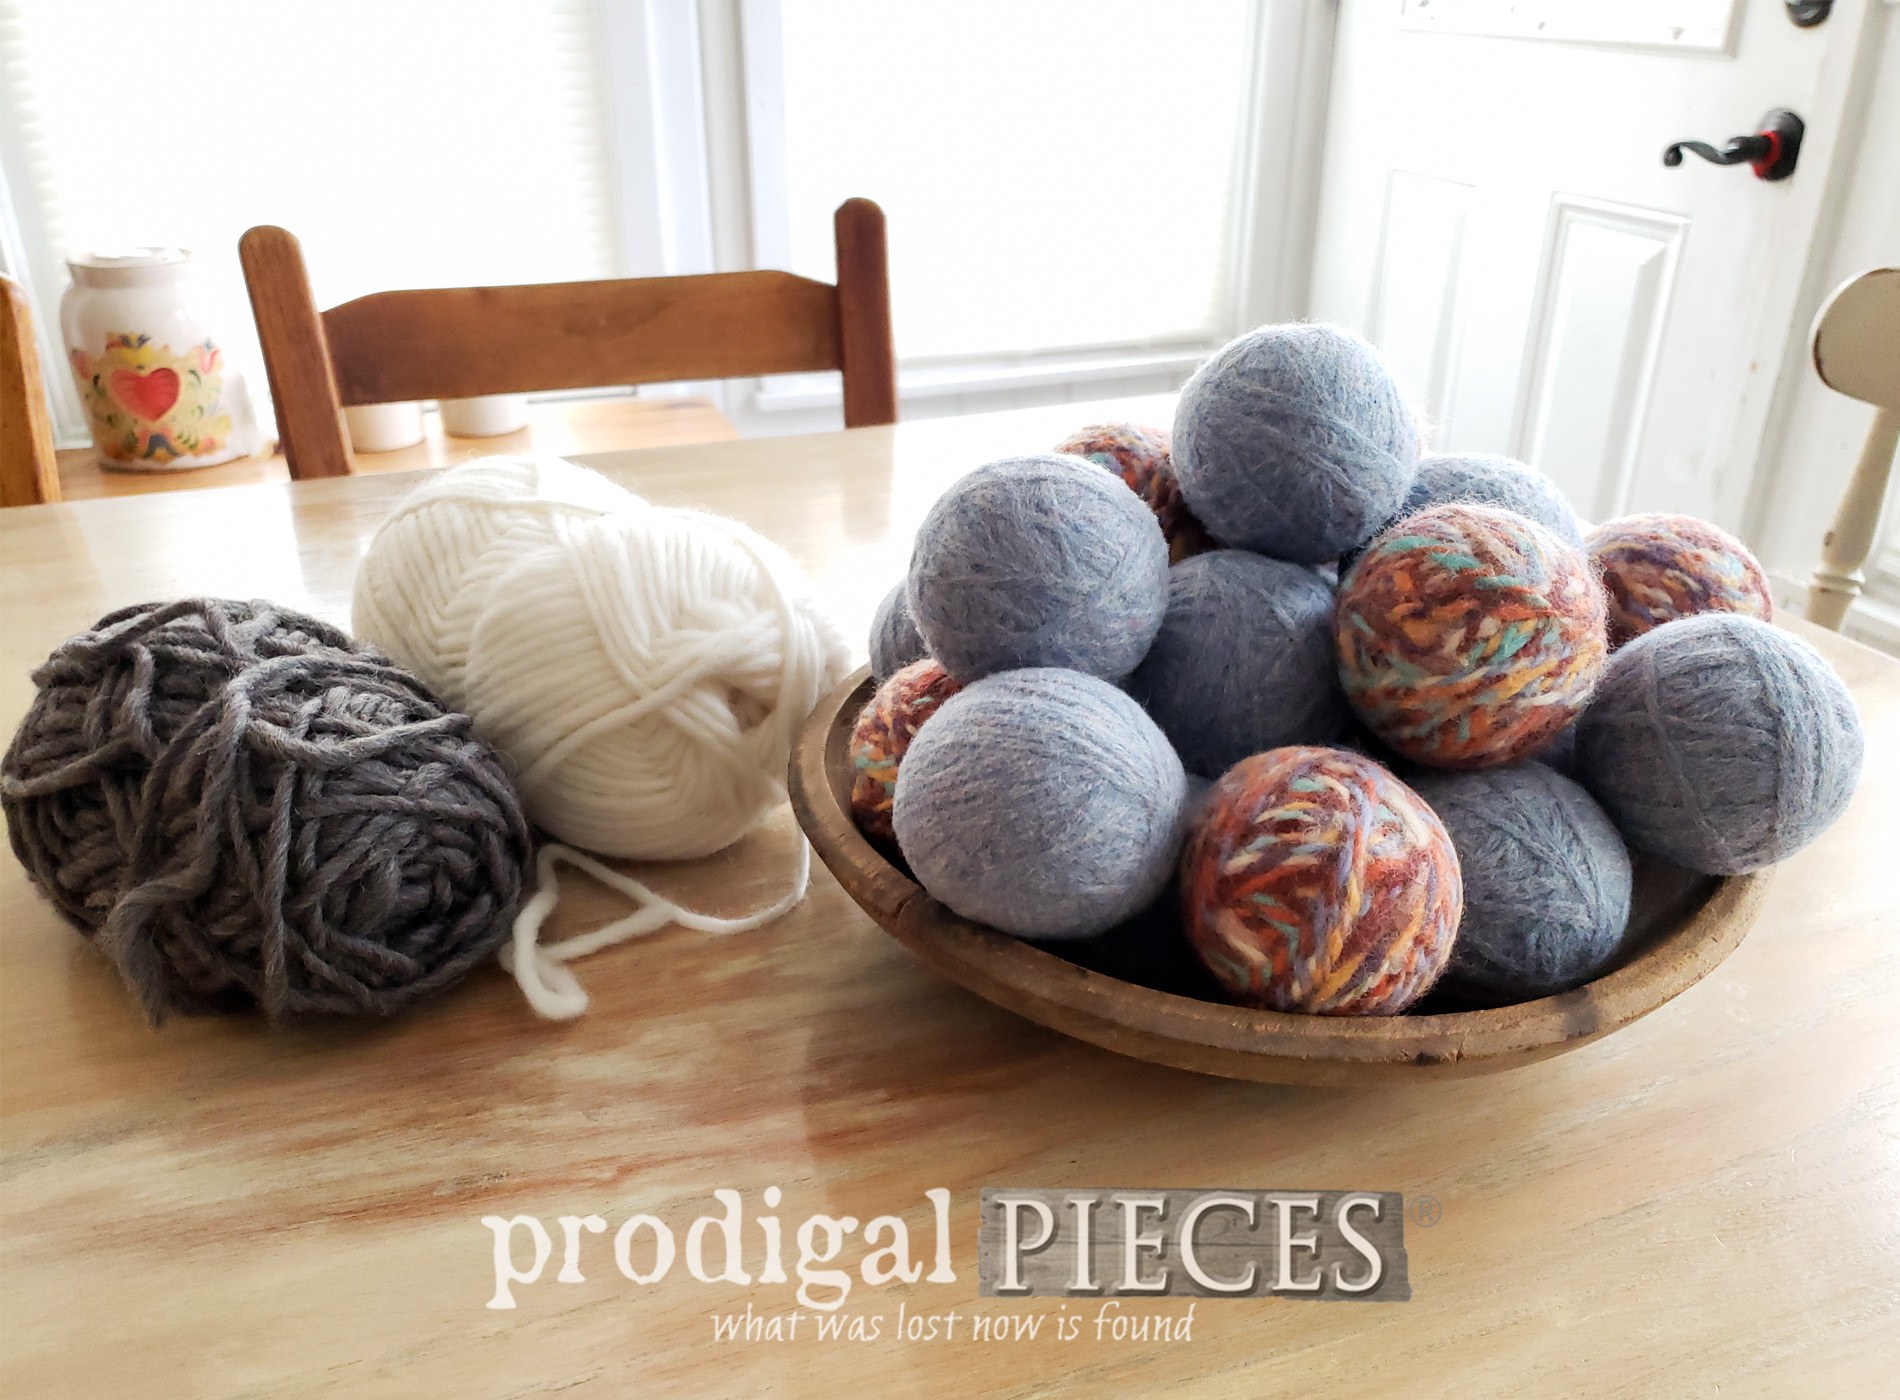 Featured DIY Wool Dryer Balls with Video Tutorial by Larissa of Prodigal Pieces | prodigalpieces.com #prodigalpieces #diy #home #laundry #upcycle #handmade #wool #crafts